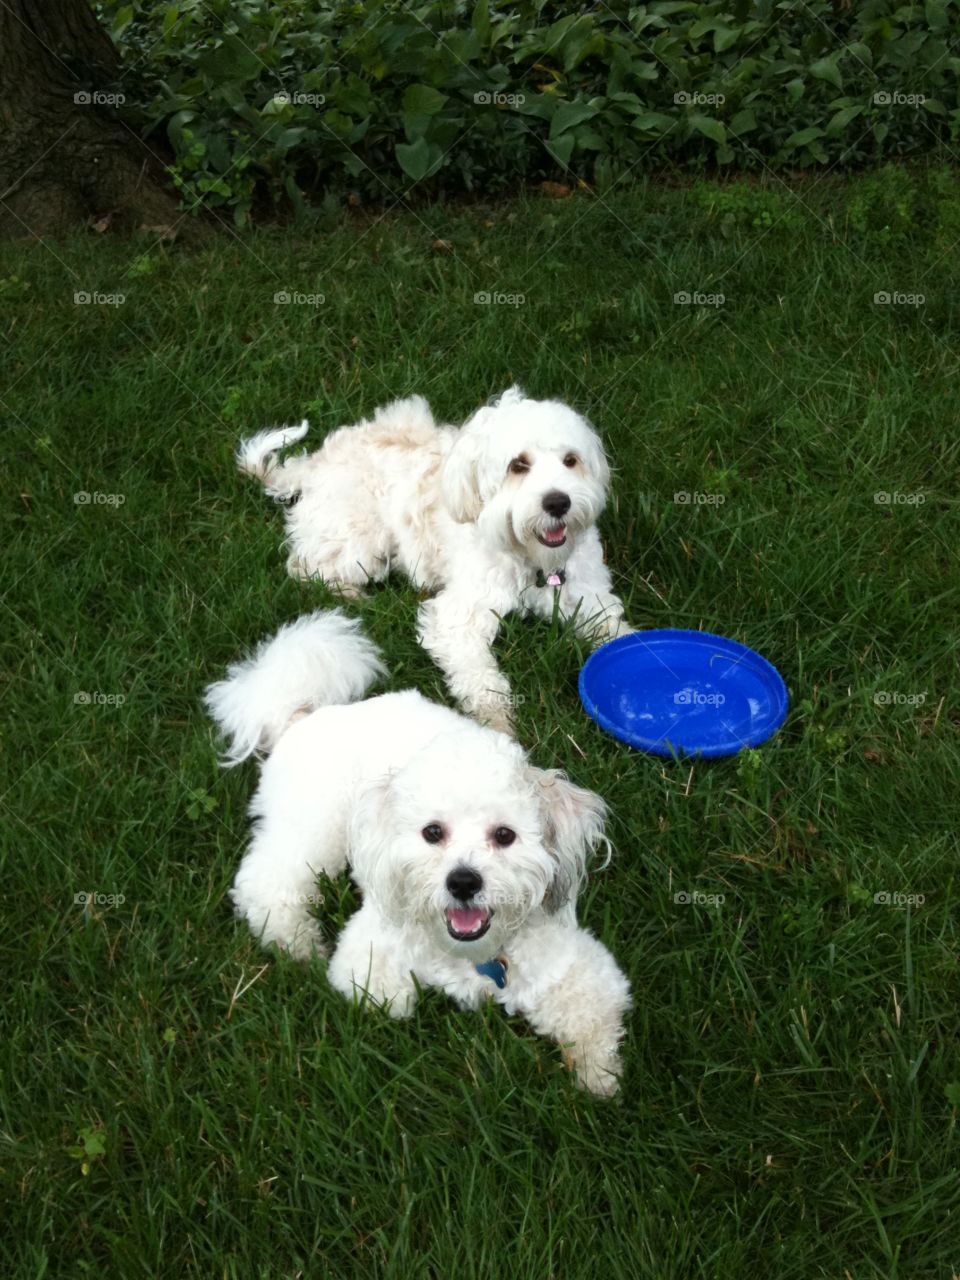 Best friends fur ever. Cooper and his canine pal enjoying playtime